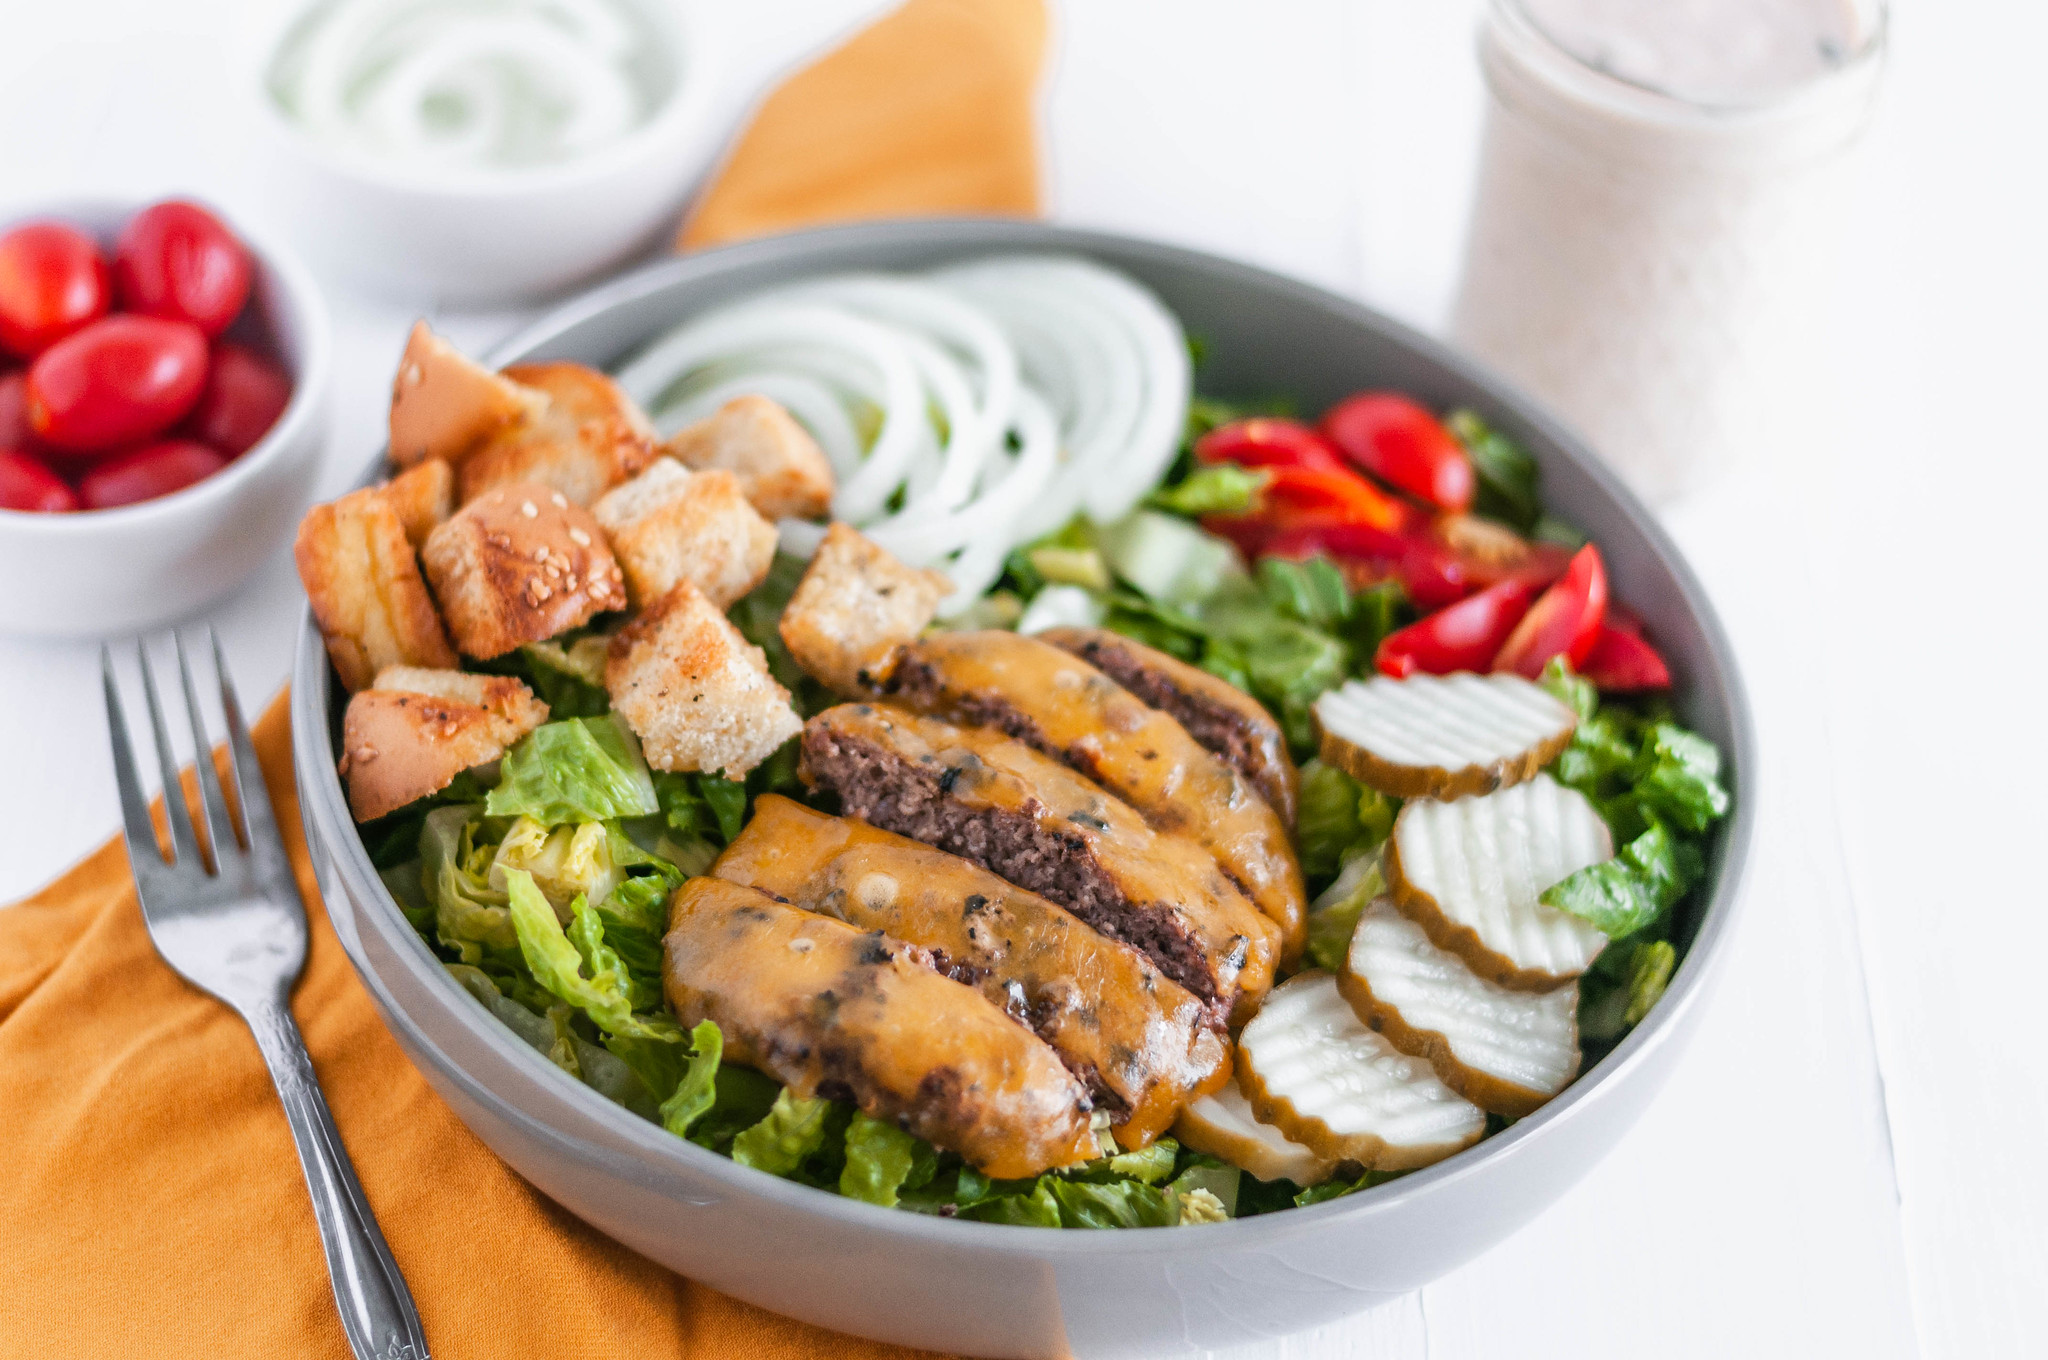 Lighten up your favorite summer main dish with this Cheeseburger Salad. All the delicious flavors from a cheeseburger atop a big bed of lettuce.